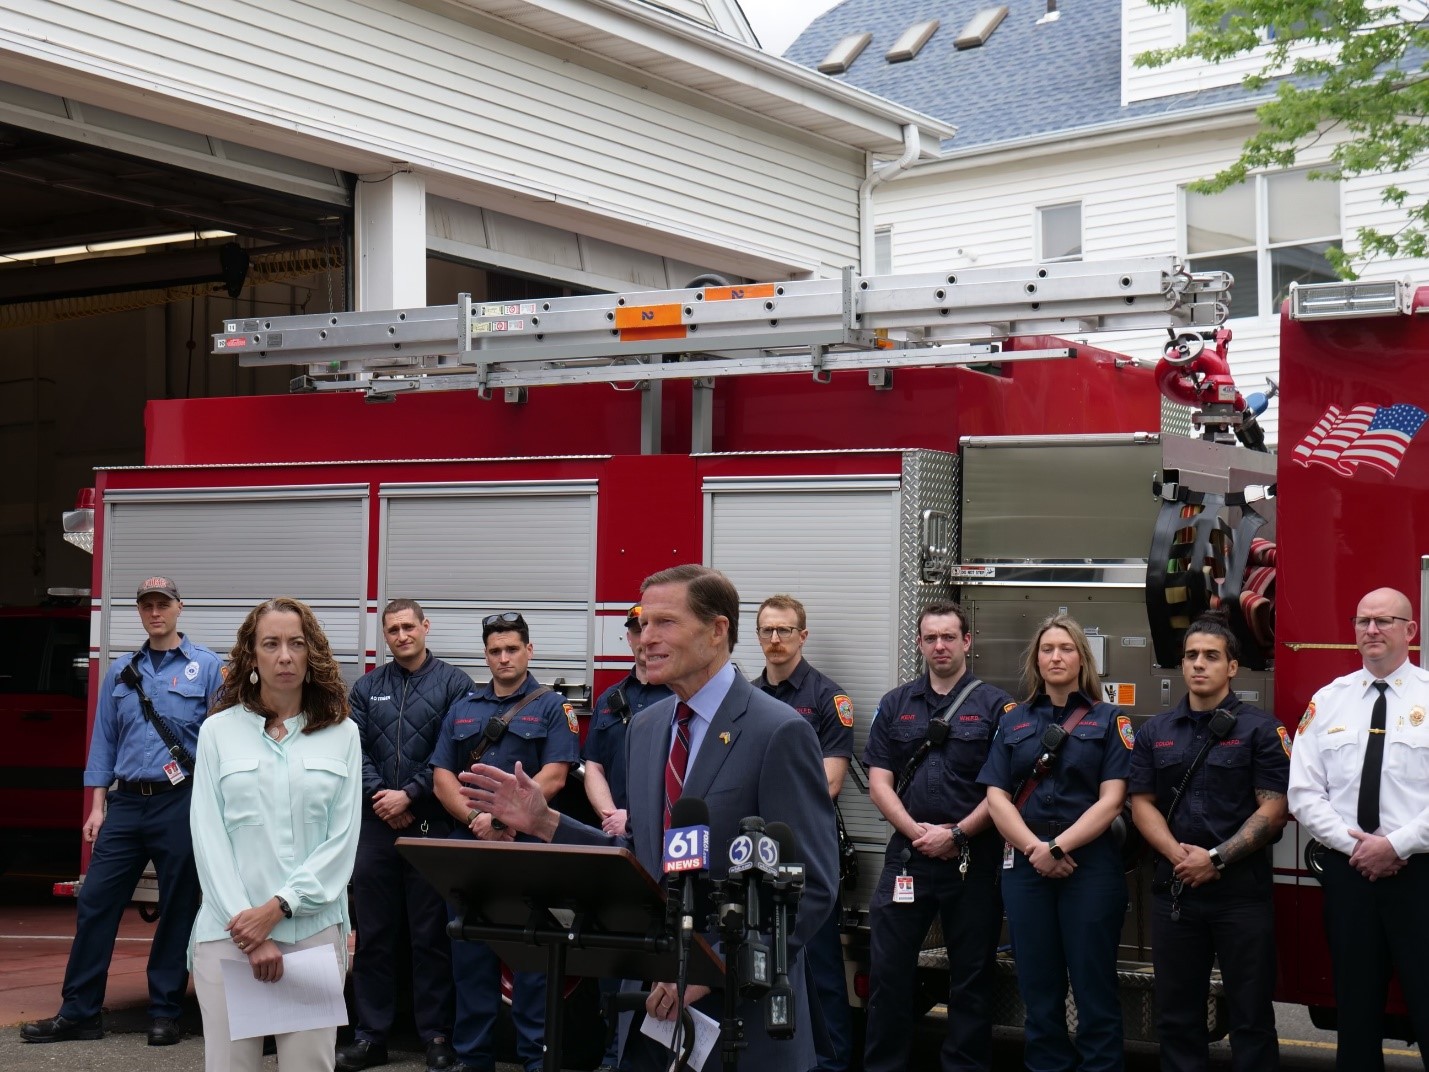 Blumenthal joined Lindsey Rogers-Seitz, the mother of a Ridgefield toddler who died in a hot car incident in 2014, to warn of the dangers of hot cars and urge detection technology be installed in new vehicles to reduce the likelihood of these preventable tragedies.  